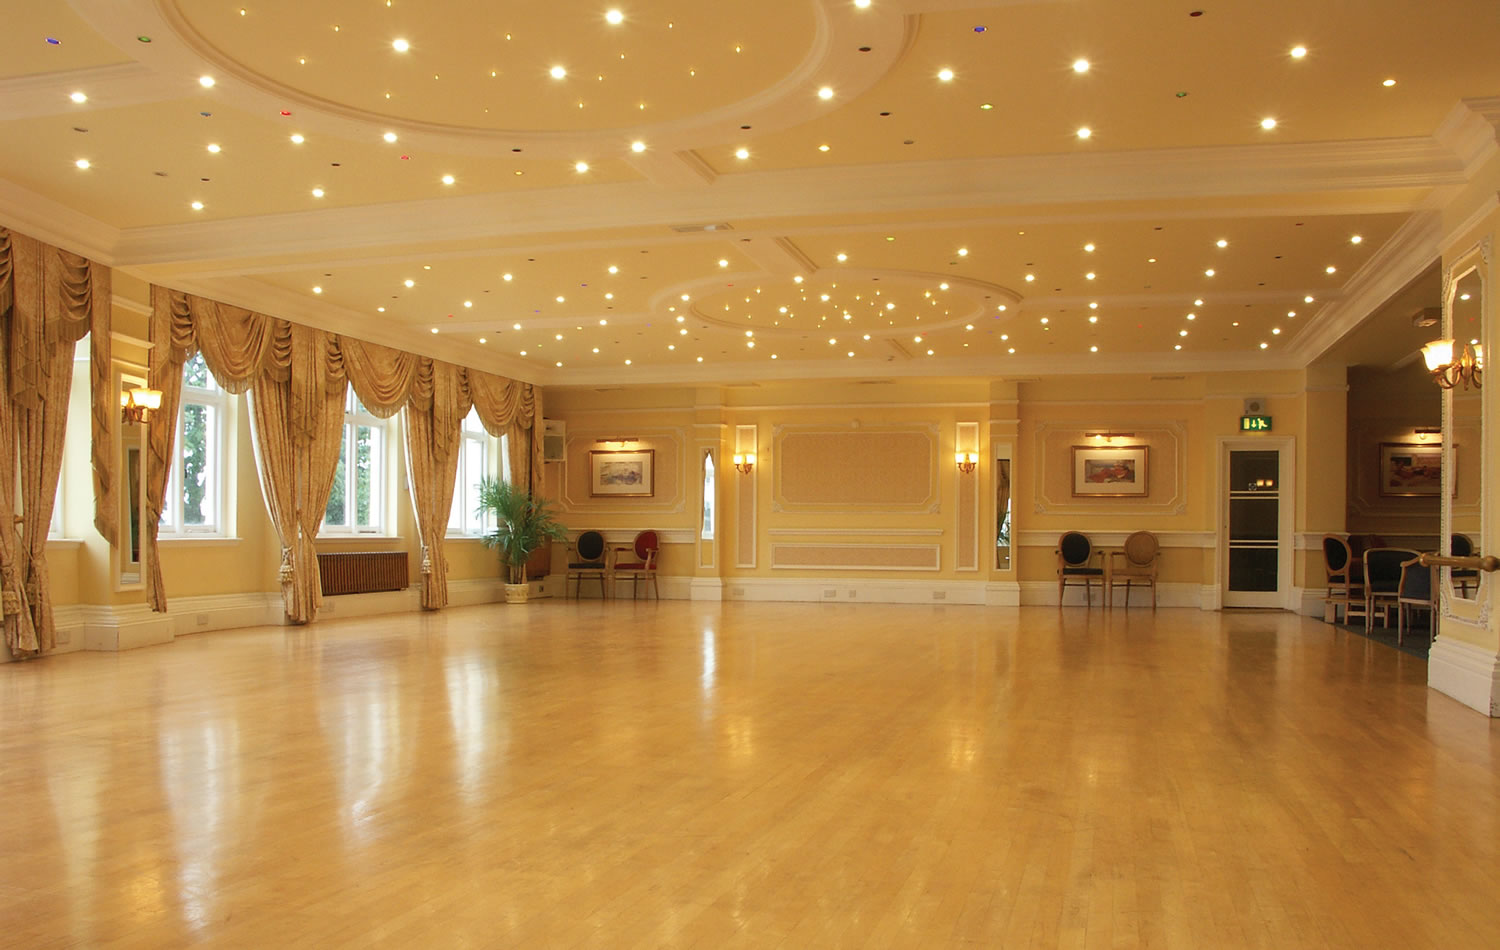 one of two large dance floors